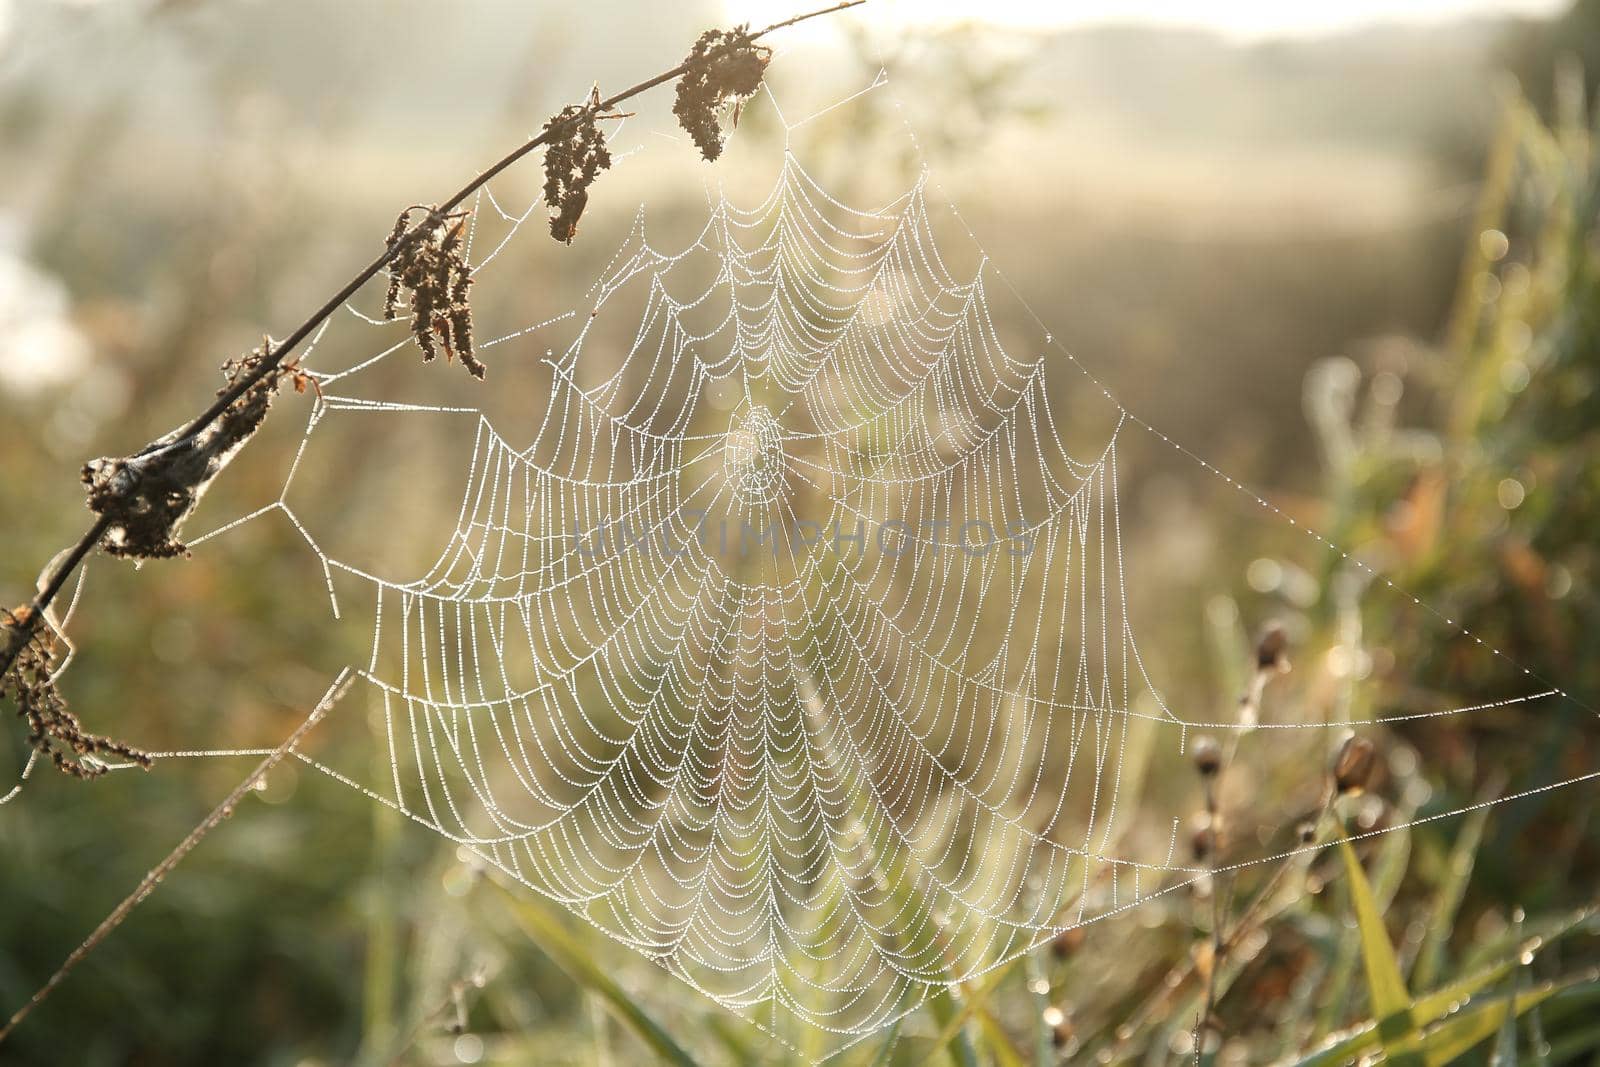 Spider web on a meadow during sunrise